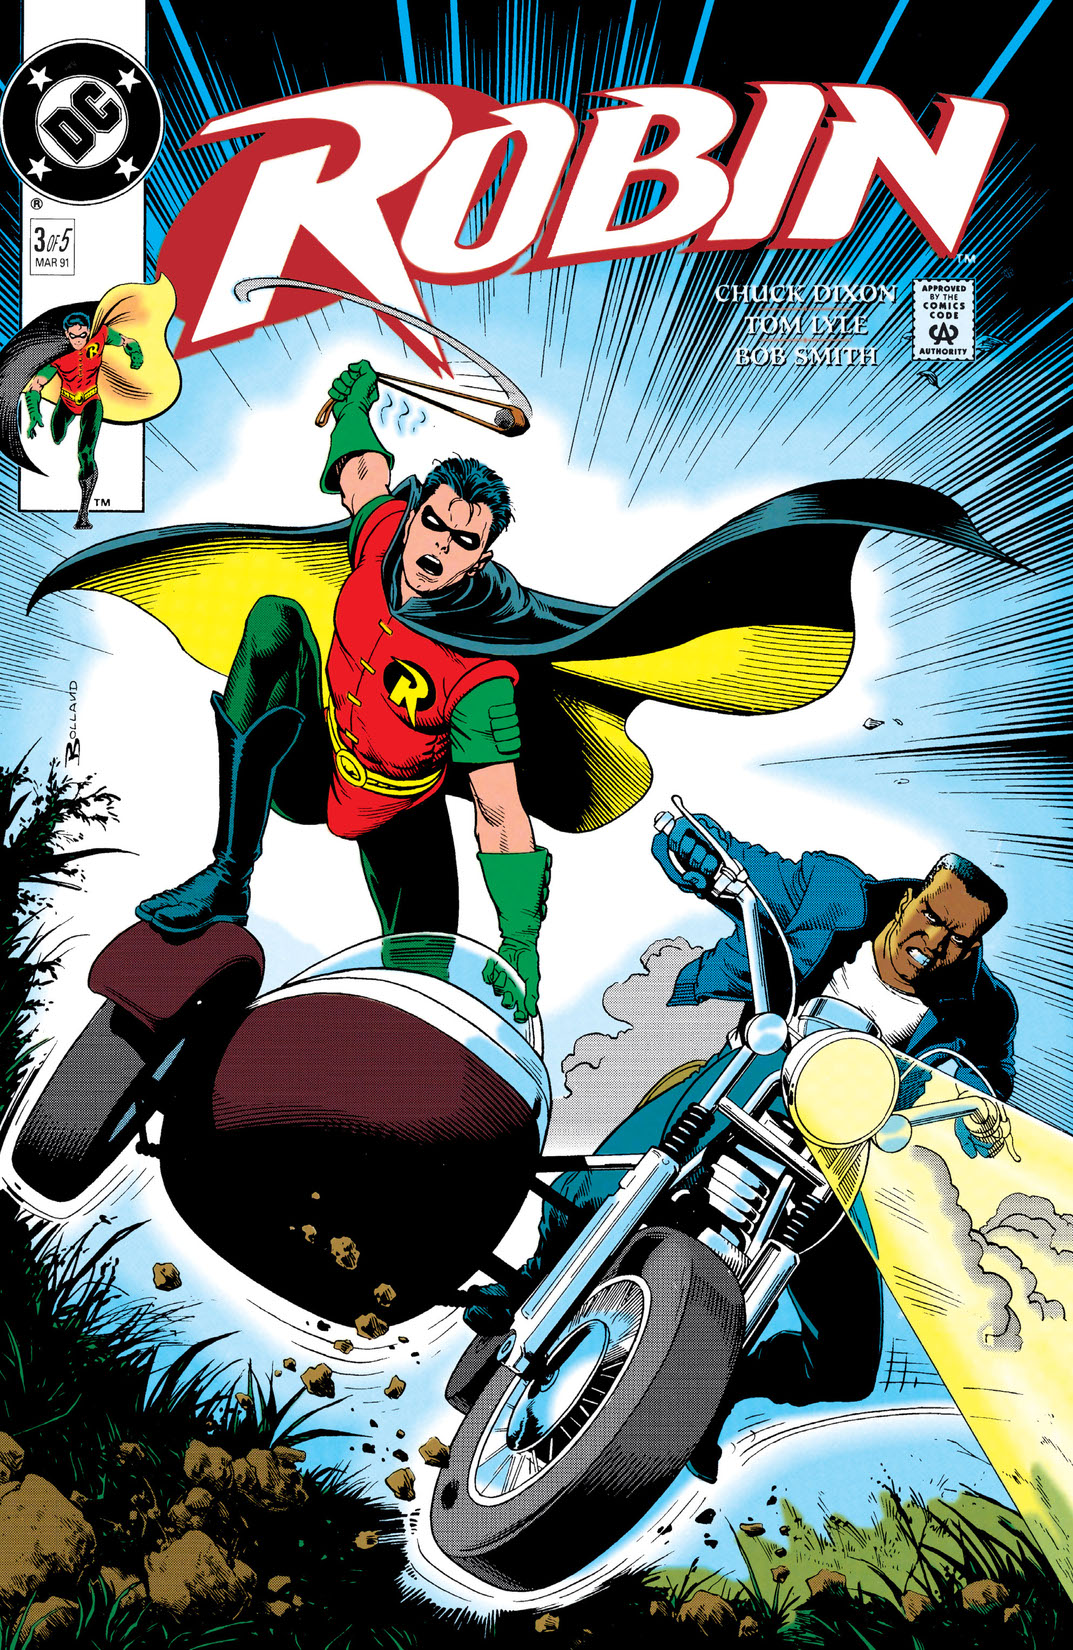 Robin Mini-Series (1990-) #3 preview images